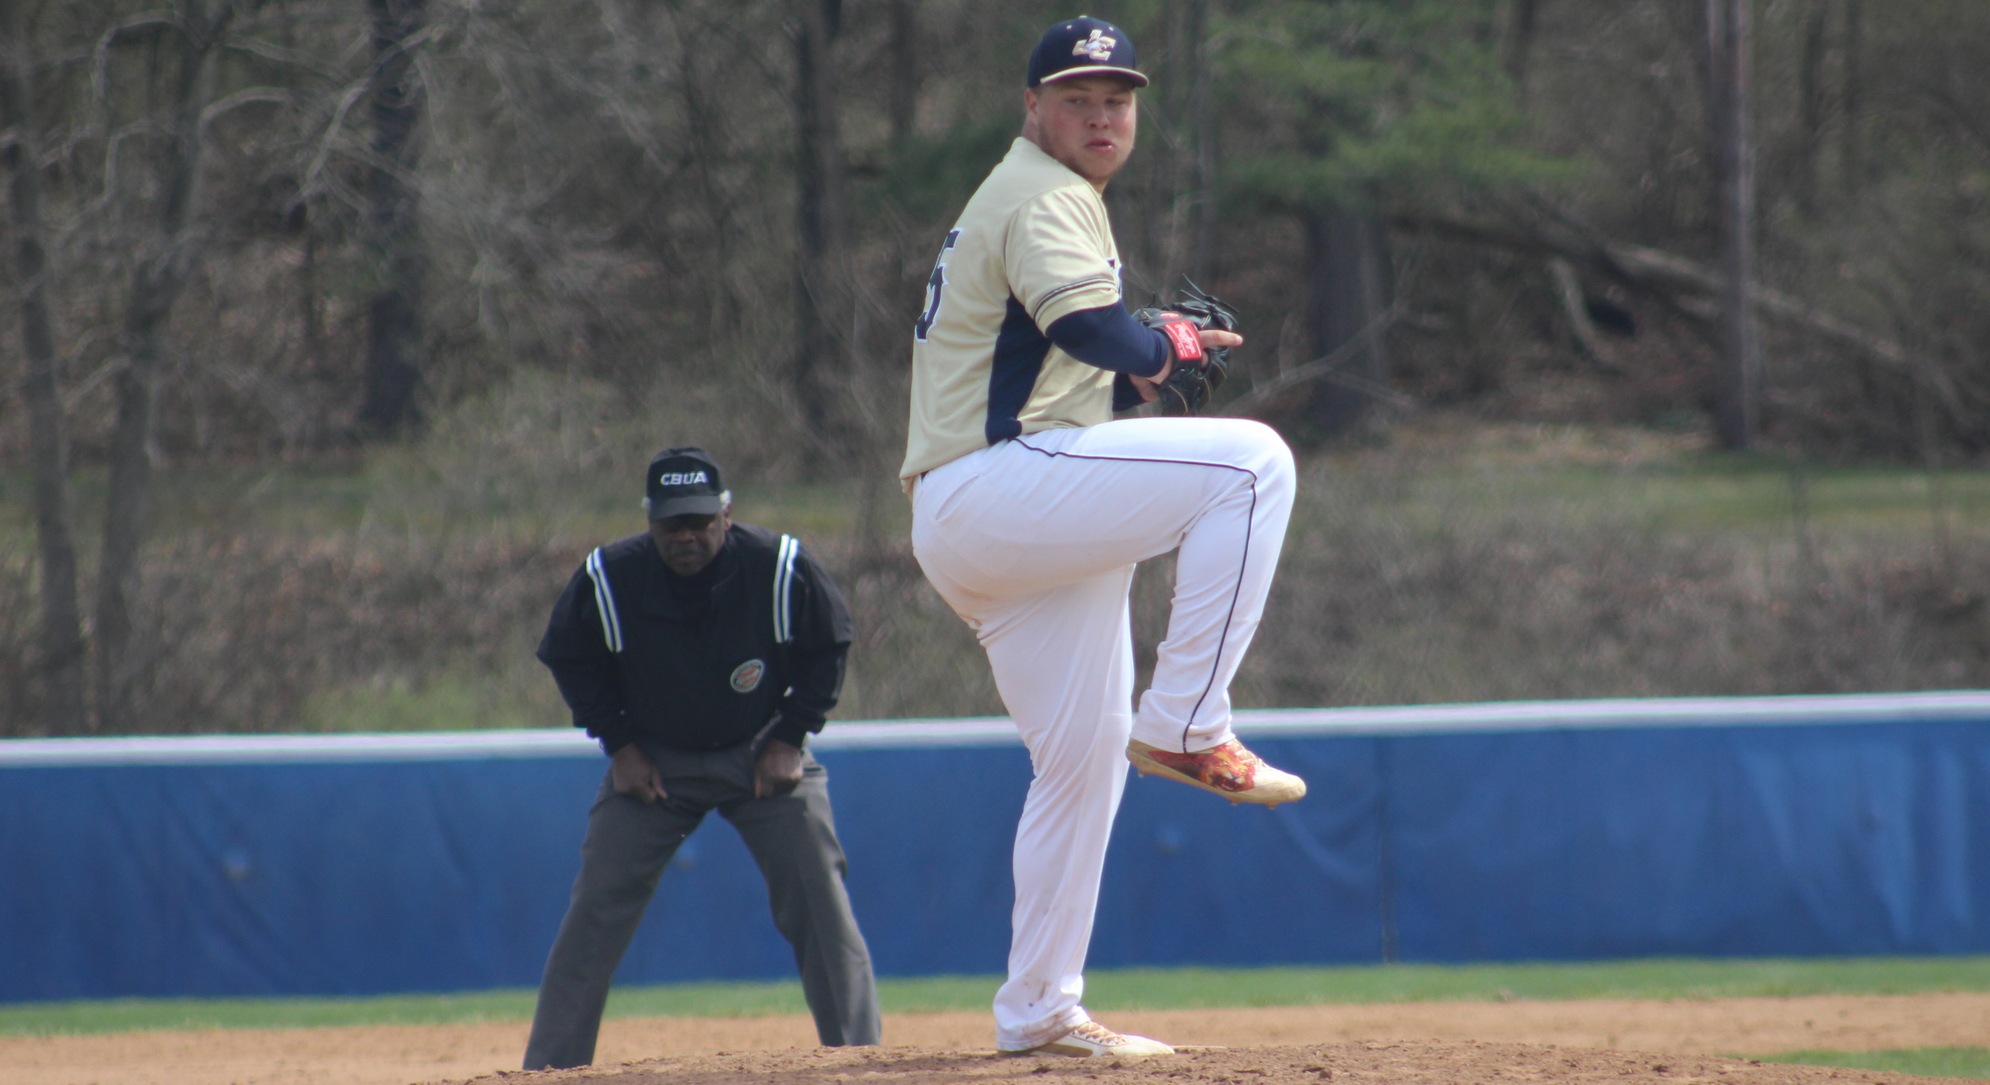 Adam Kipp started on the mound for the Eagles, striking out three.